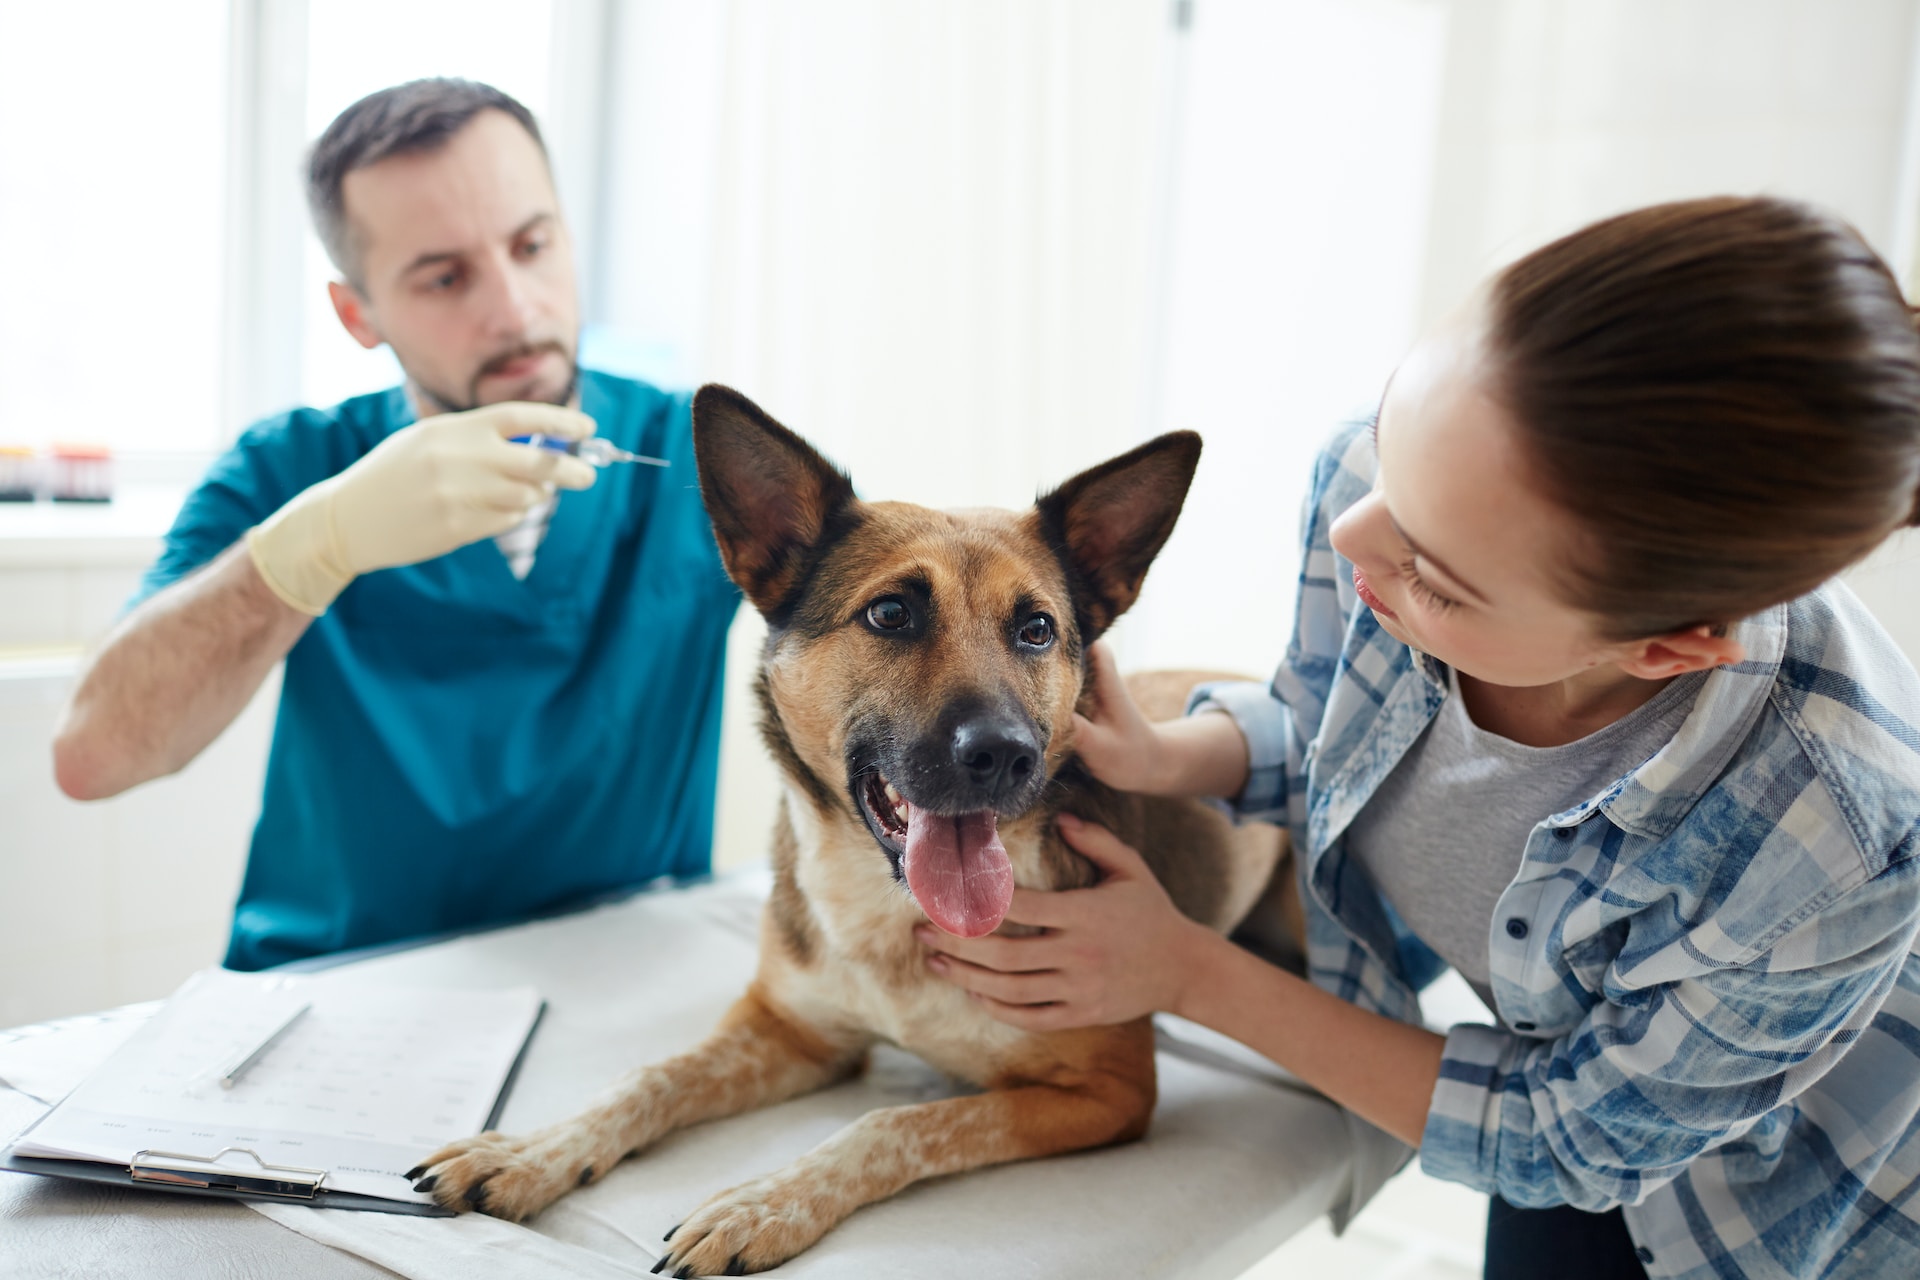 A vet injecting a dog with a vaccine at a clinic